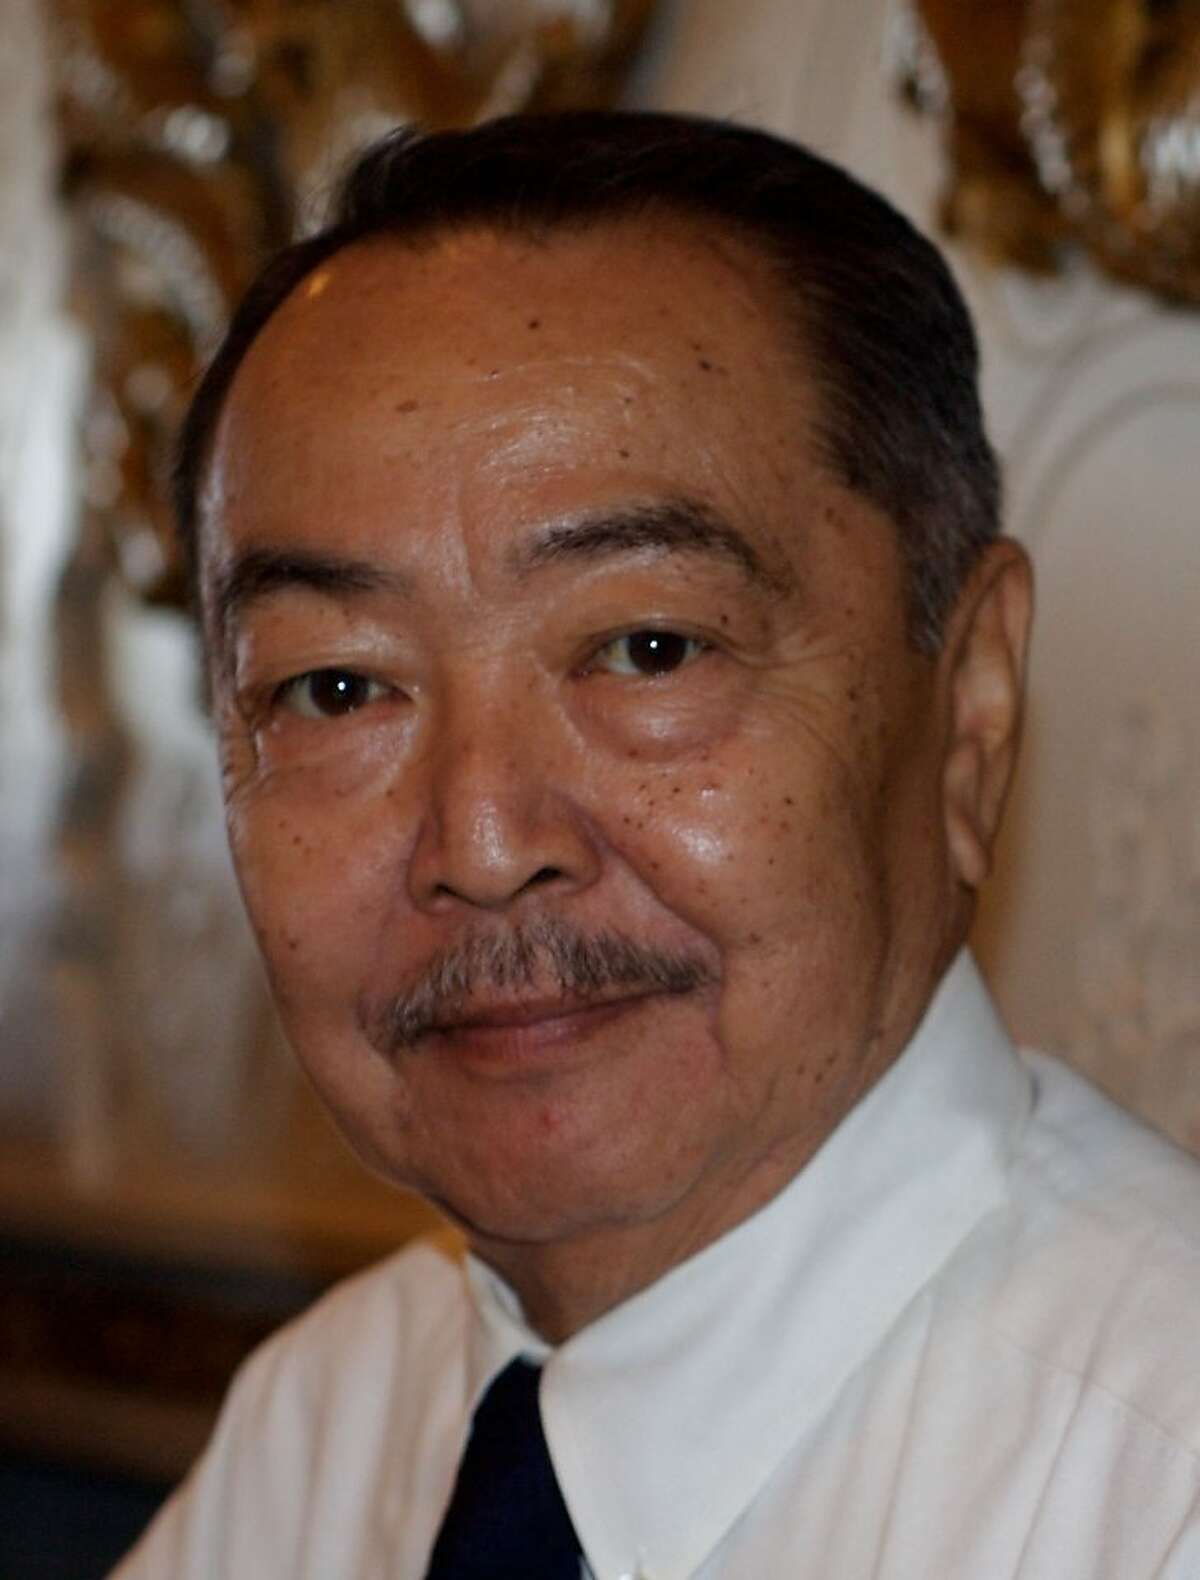 Richard Aoki was a member of the Black Panther Party and a civil rights activist in the 1960s. He died in 2009.